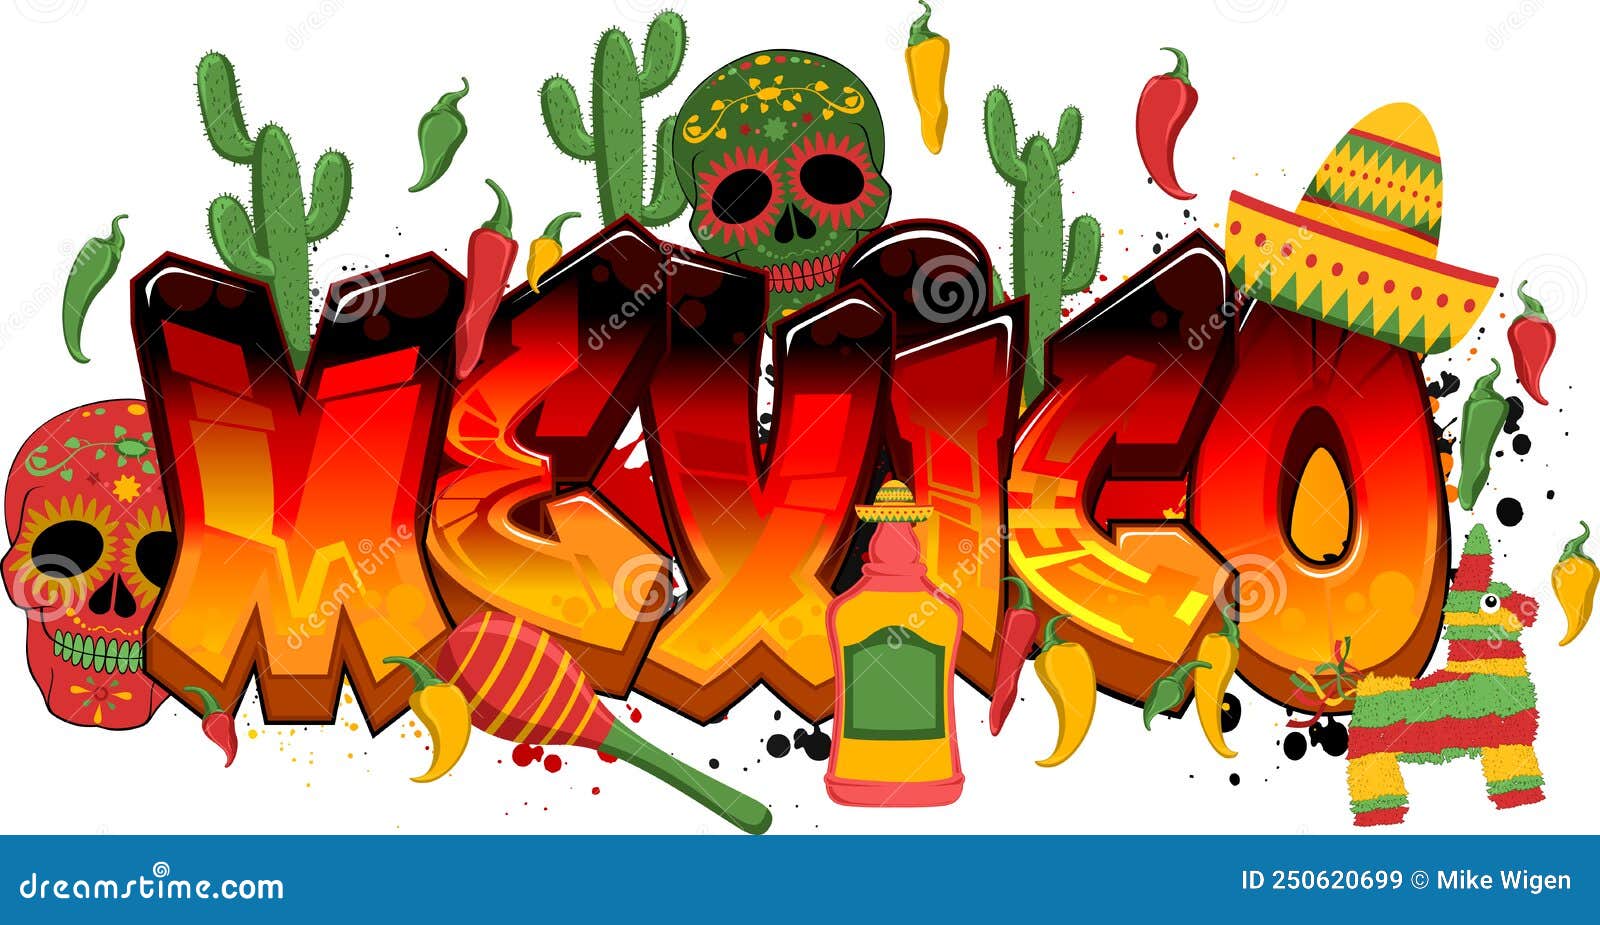 quality mexican food themed  graphic  - mexico